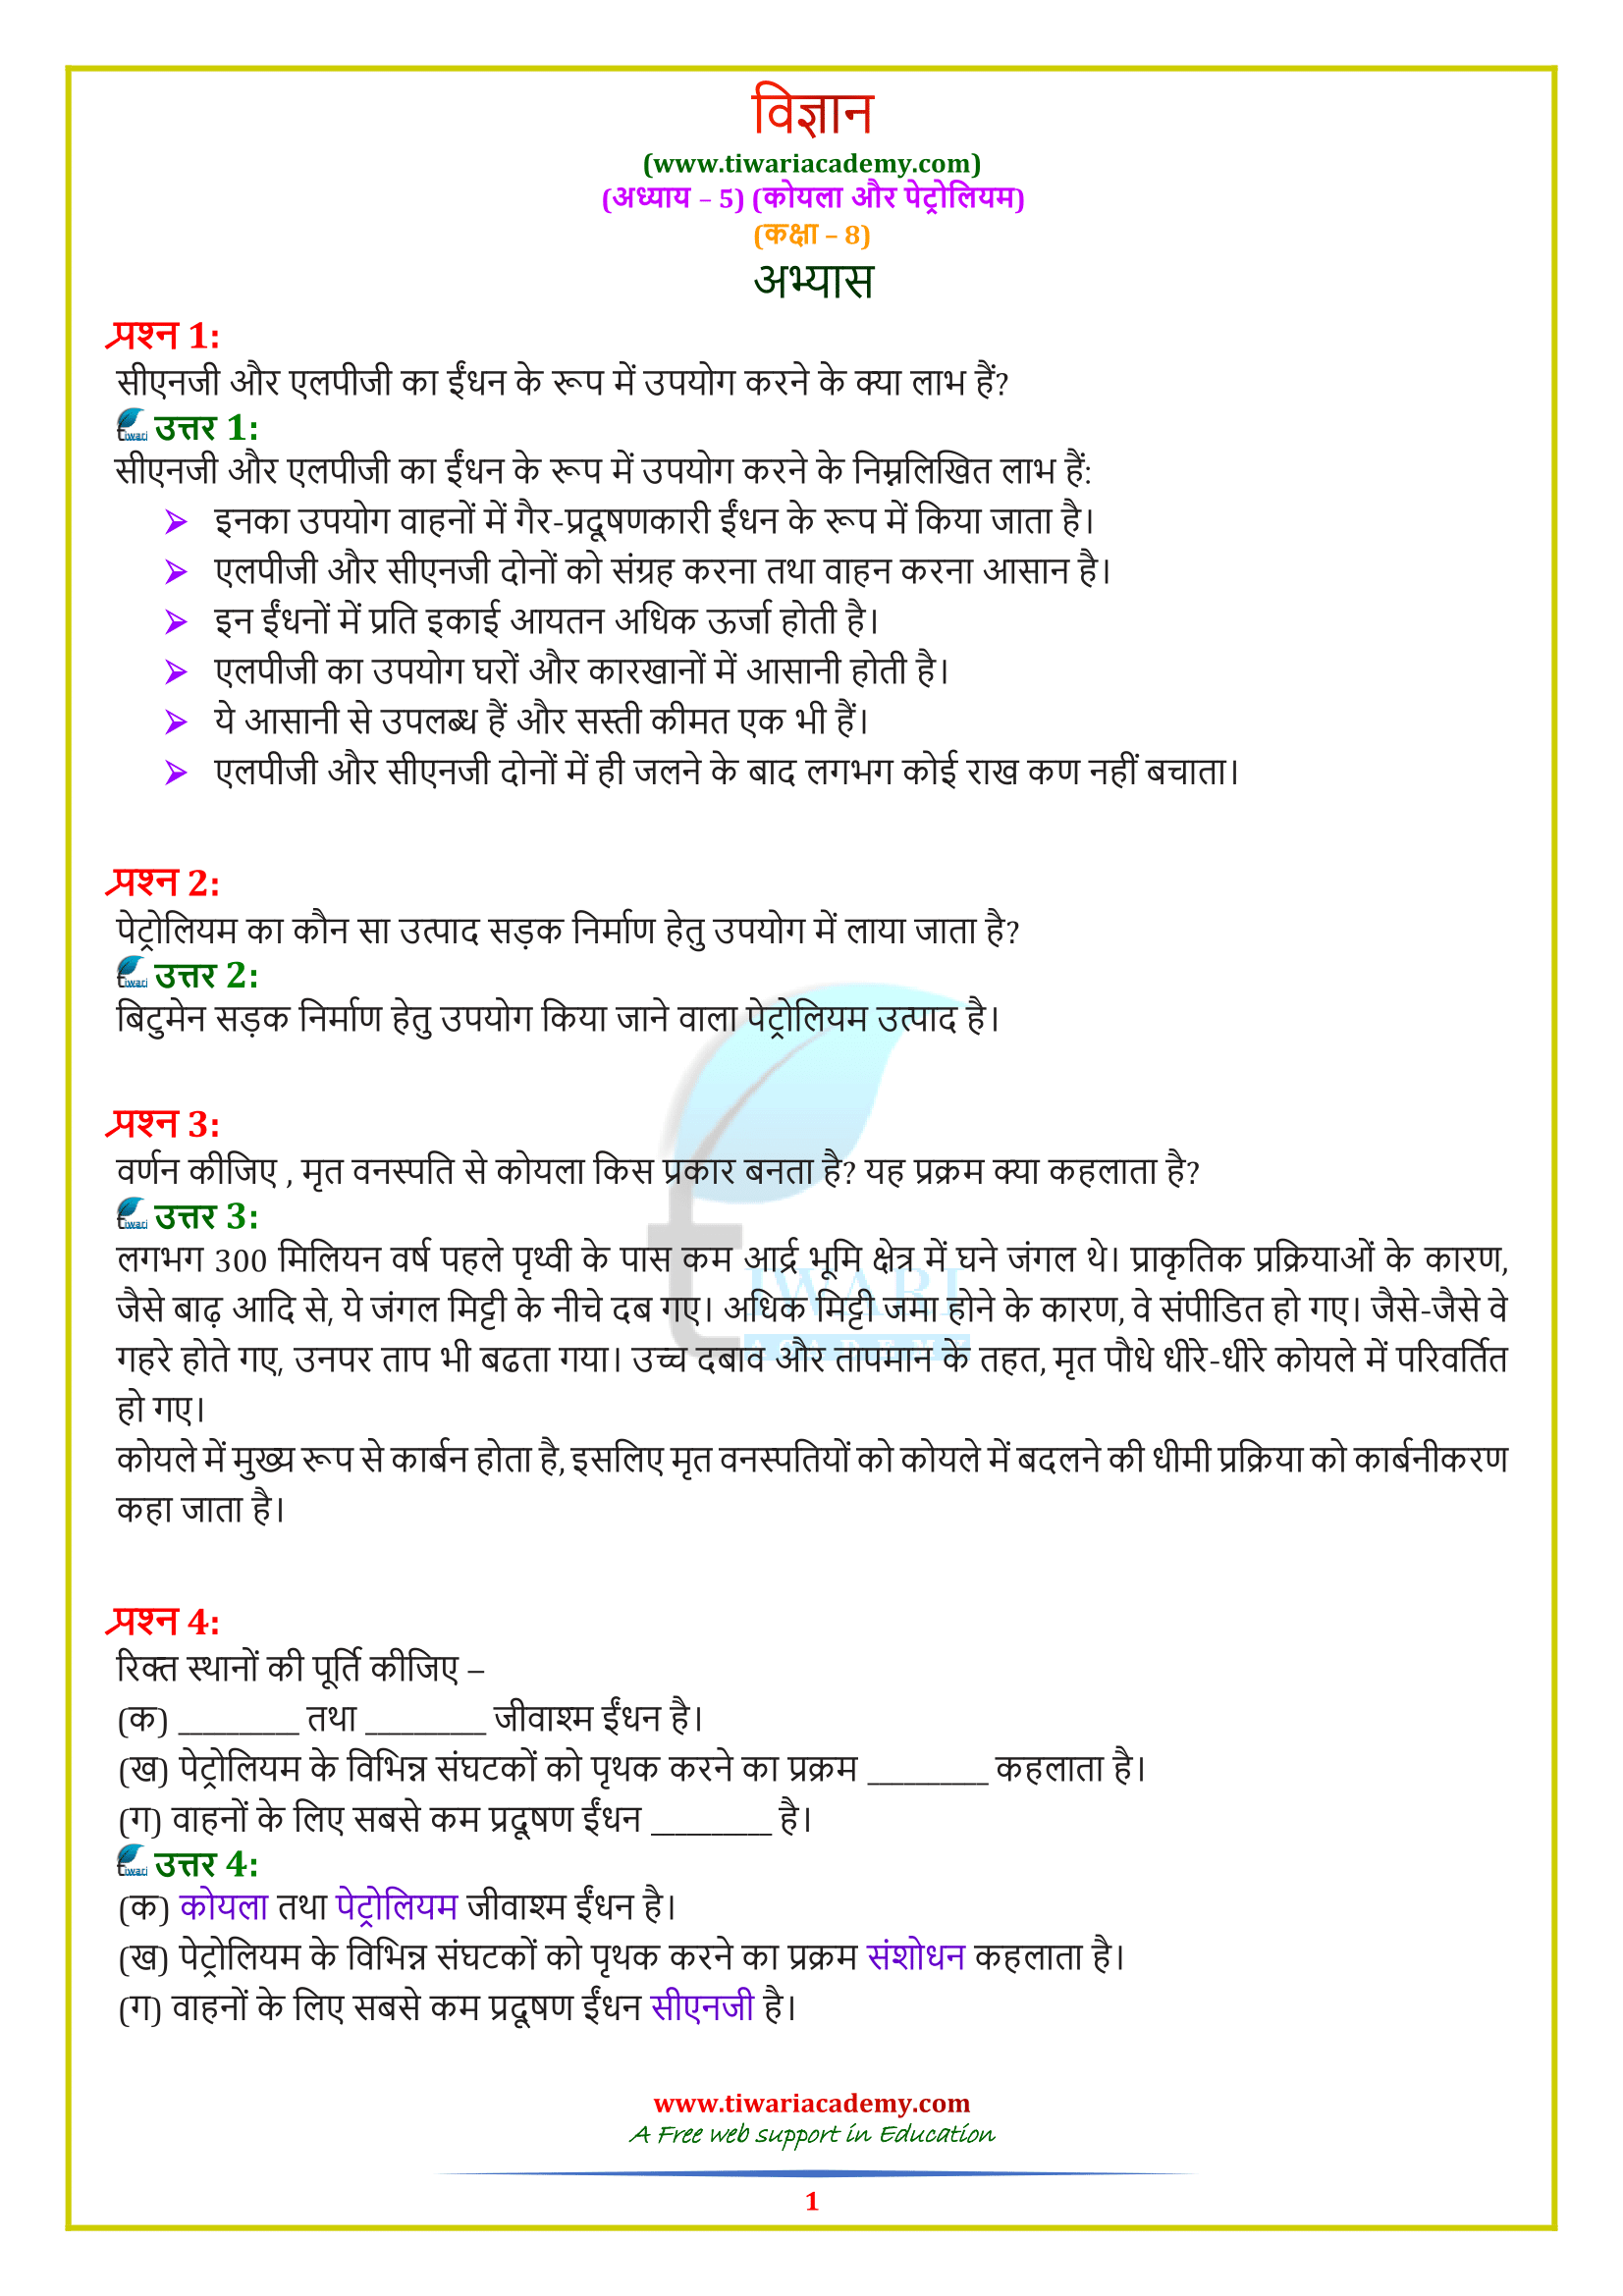 Class 8 Science Chapter 5